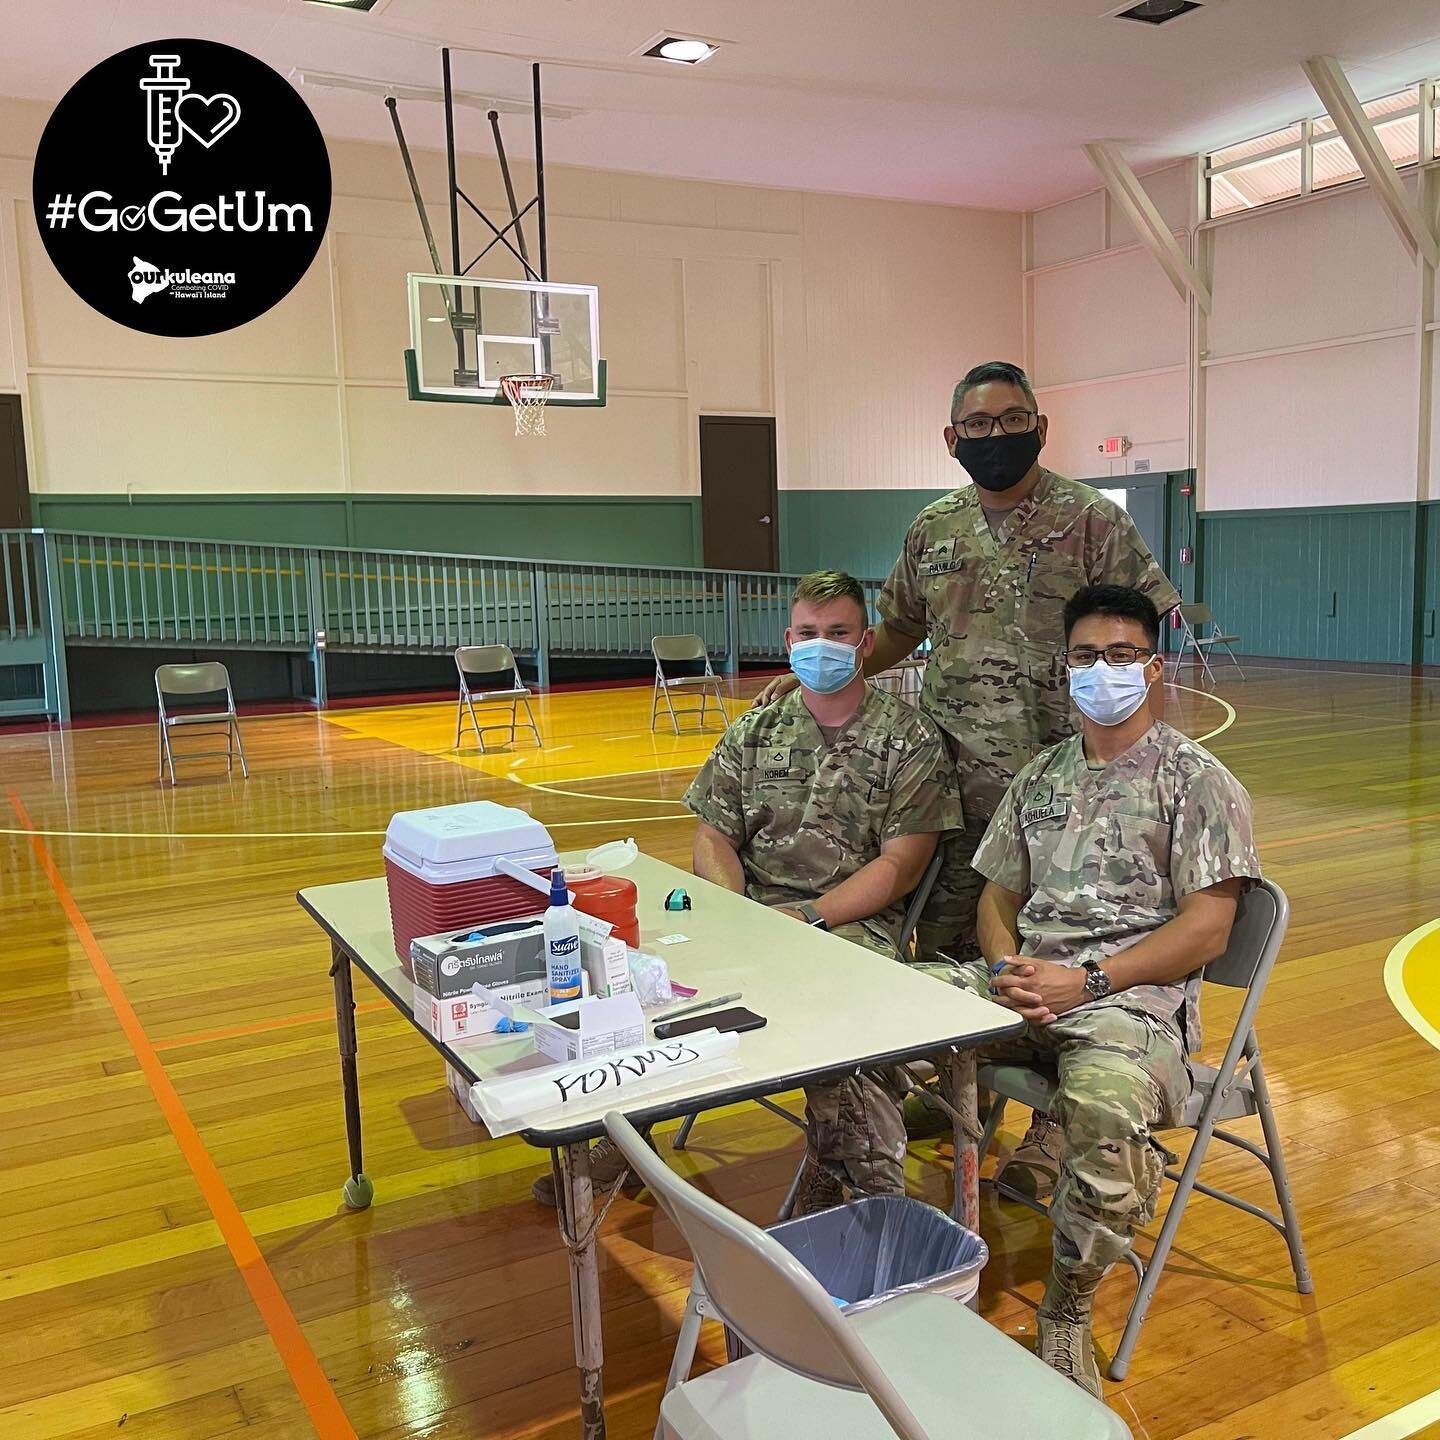 Mahalo to DOH and the National Guard for putting on a vaccine clinic in Naalehu today! #GoGetUm #IGotUm #HIGotVaccinated #OurKuleana